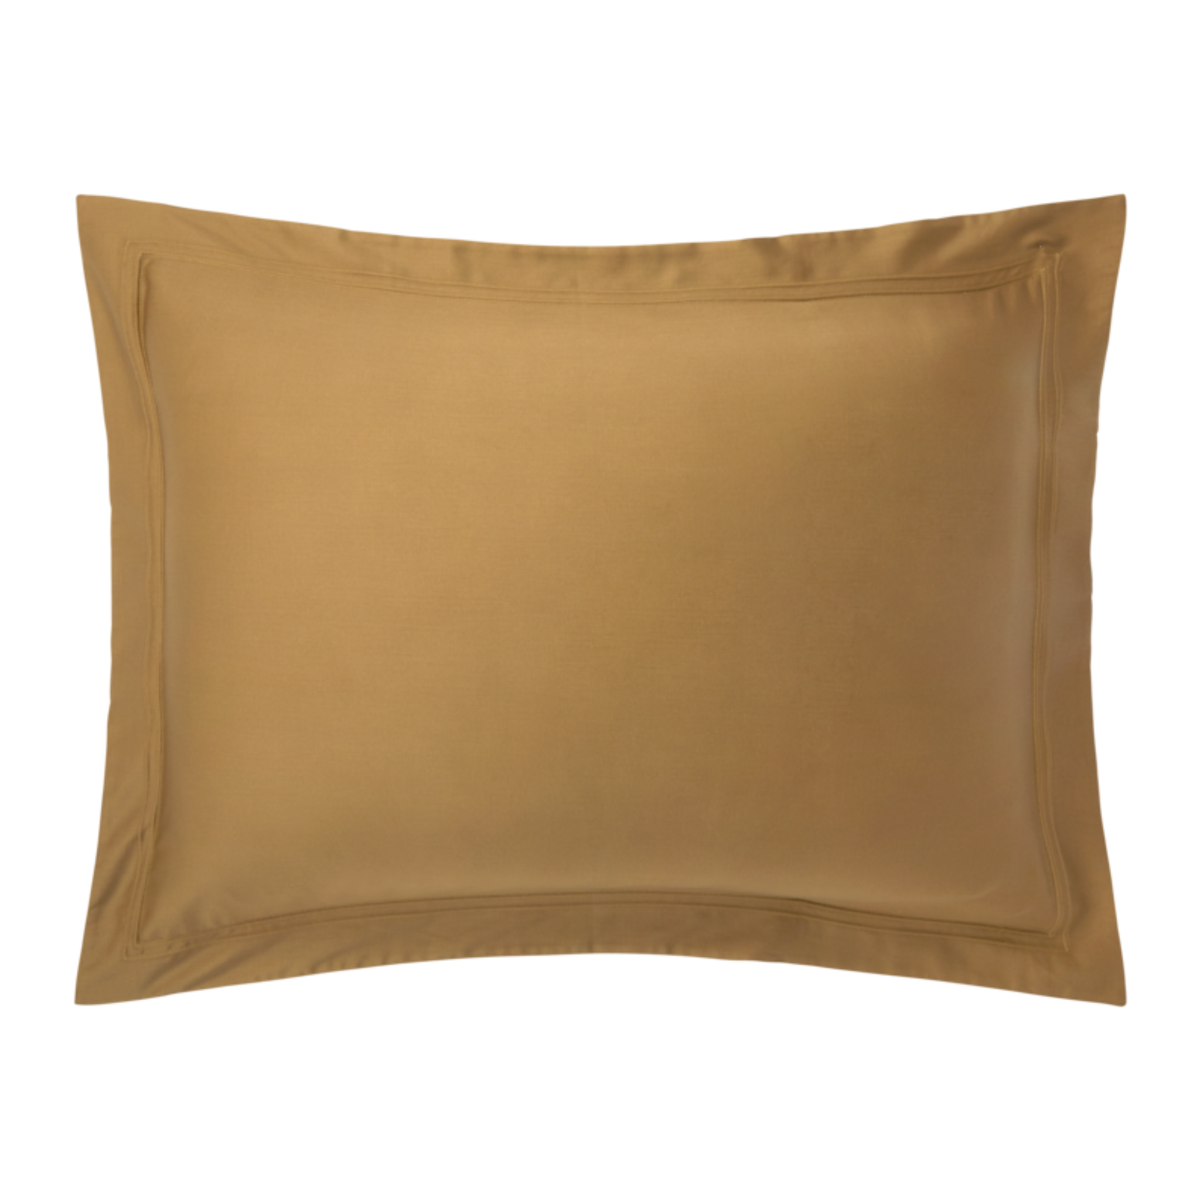 Pillow of Yves Delorme Triomphe Bedding in Bronze Color